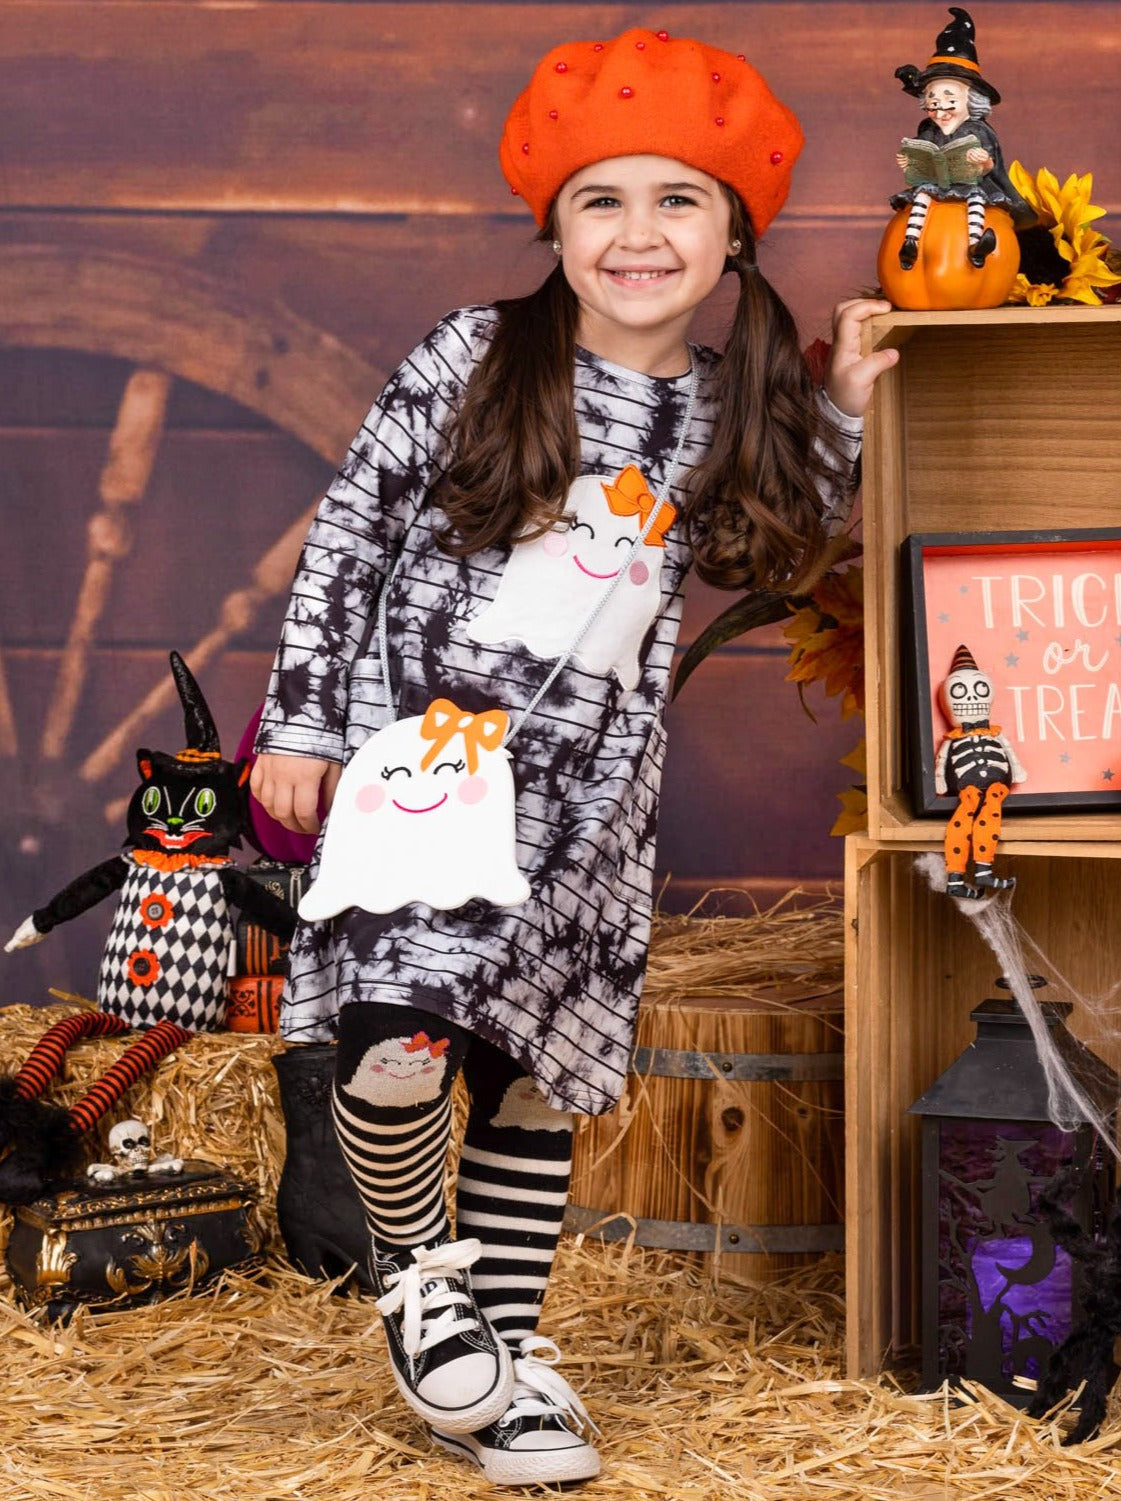 Little girls Halloween long-sleeve tie-dye striped A-line dress with ghost girl applique, pockets, matching striped knee-high socks, and ghost crossbody purse - Mia Belle Girls